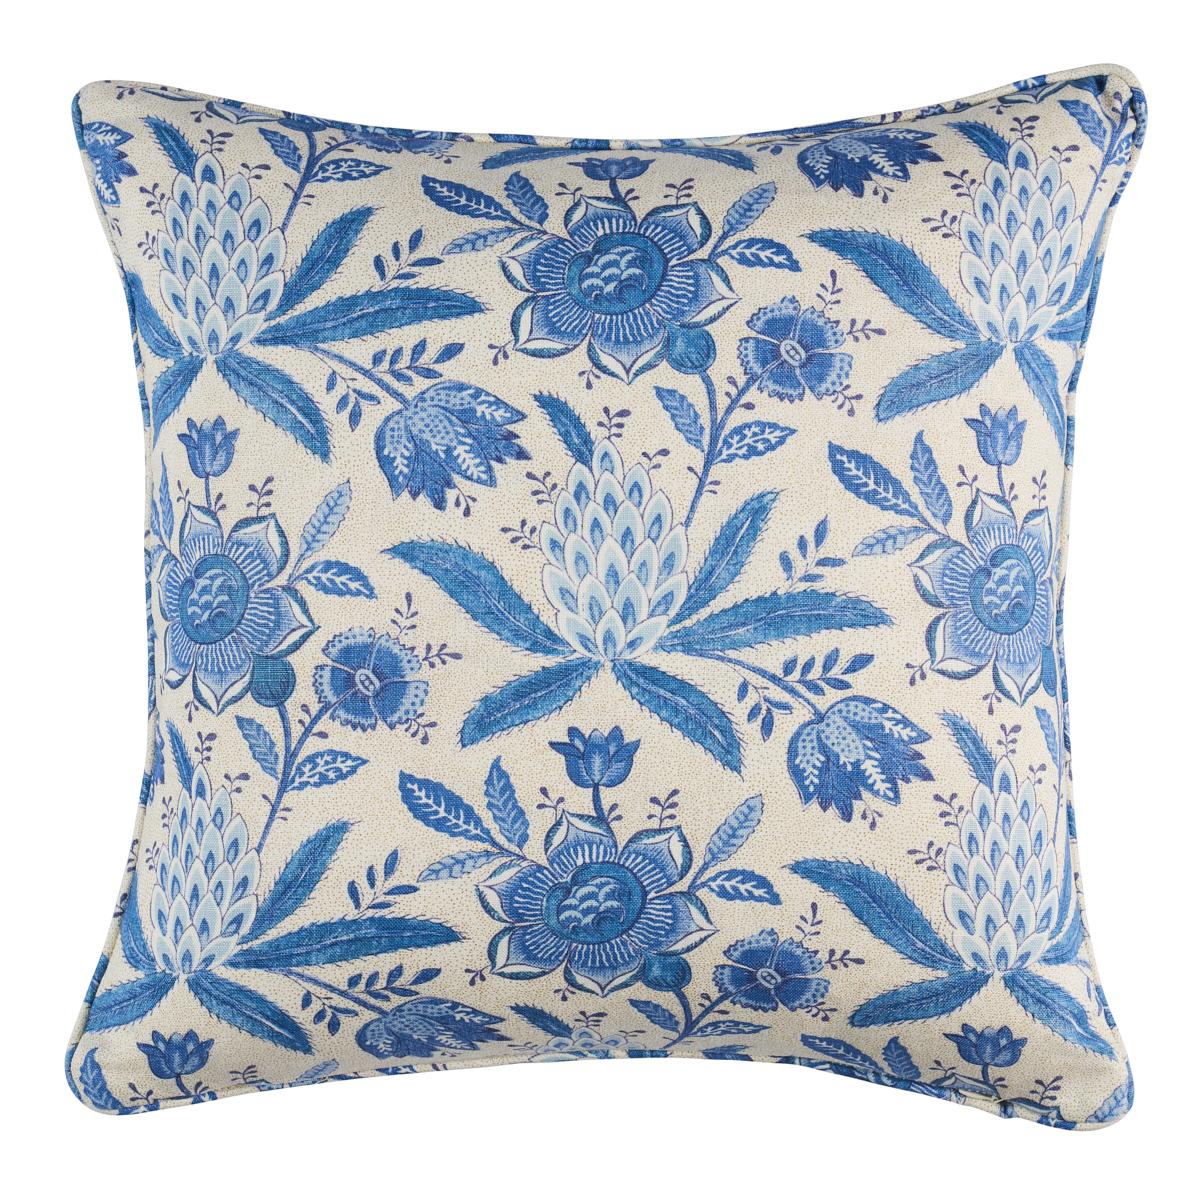 This pillow features Lafayette Botanical with a self welt finish. Inspired by a turn-of-the-18th-century French chintz, Lafayette Botanical in cornflower features an exuberant flower and pineapple print reflecting the European and American affinity